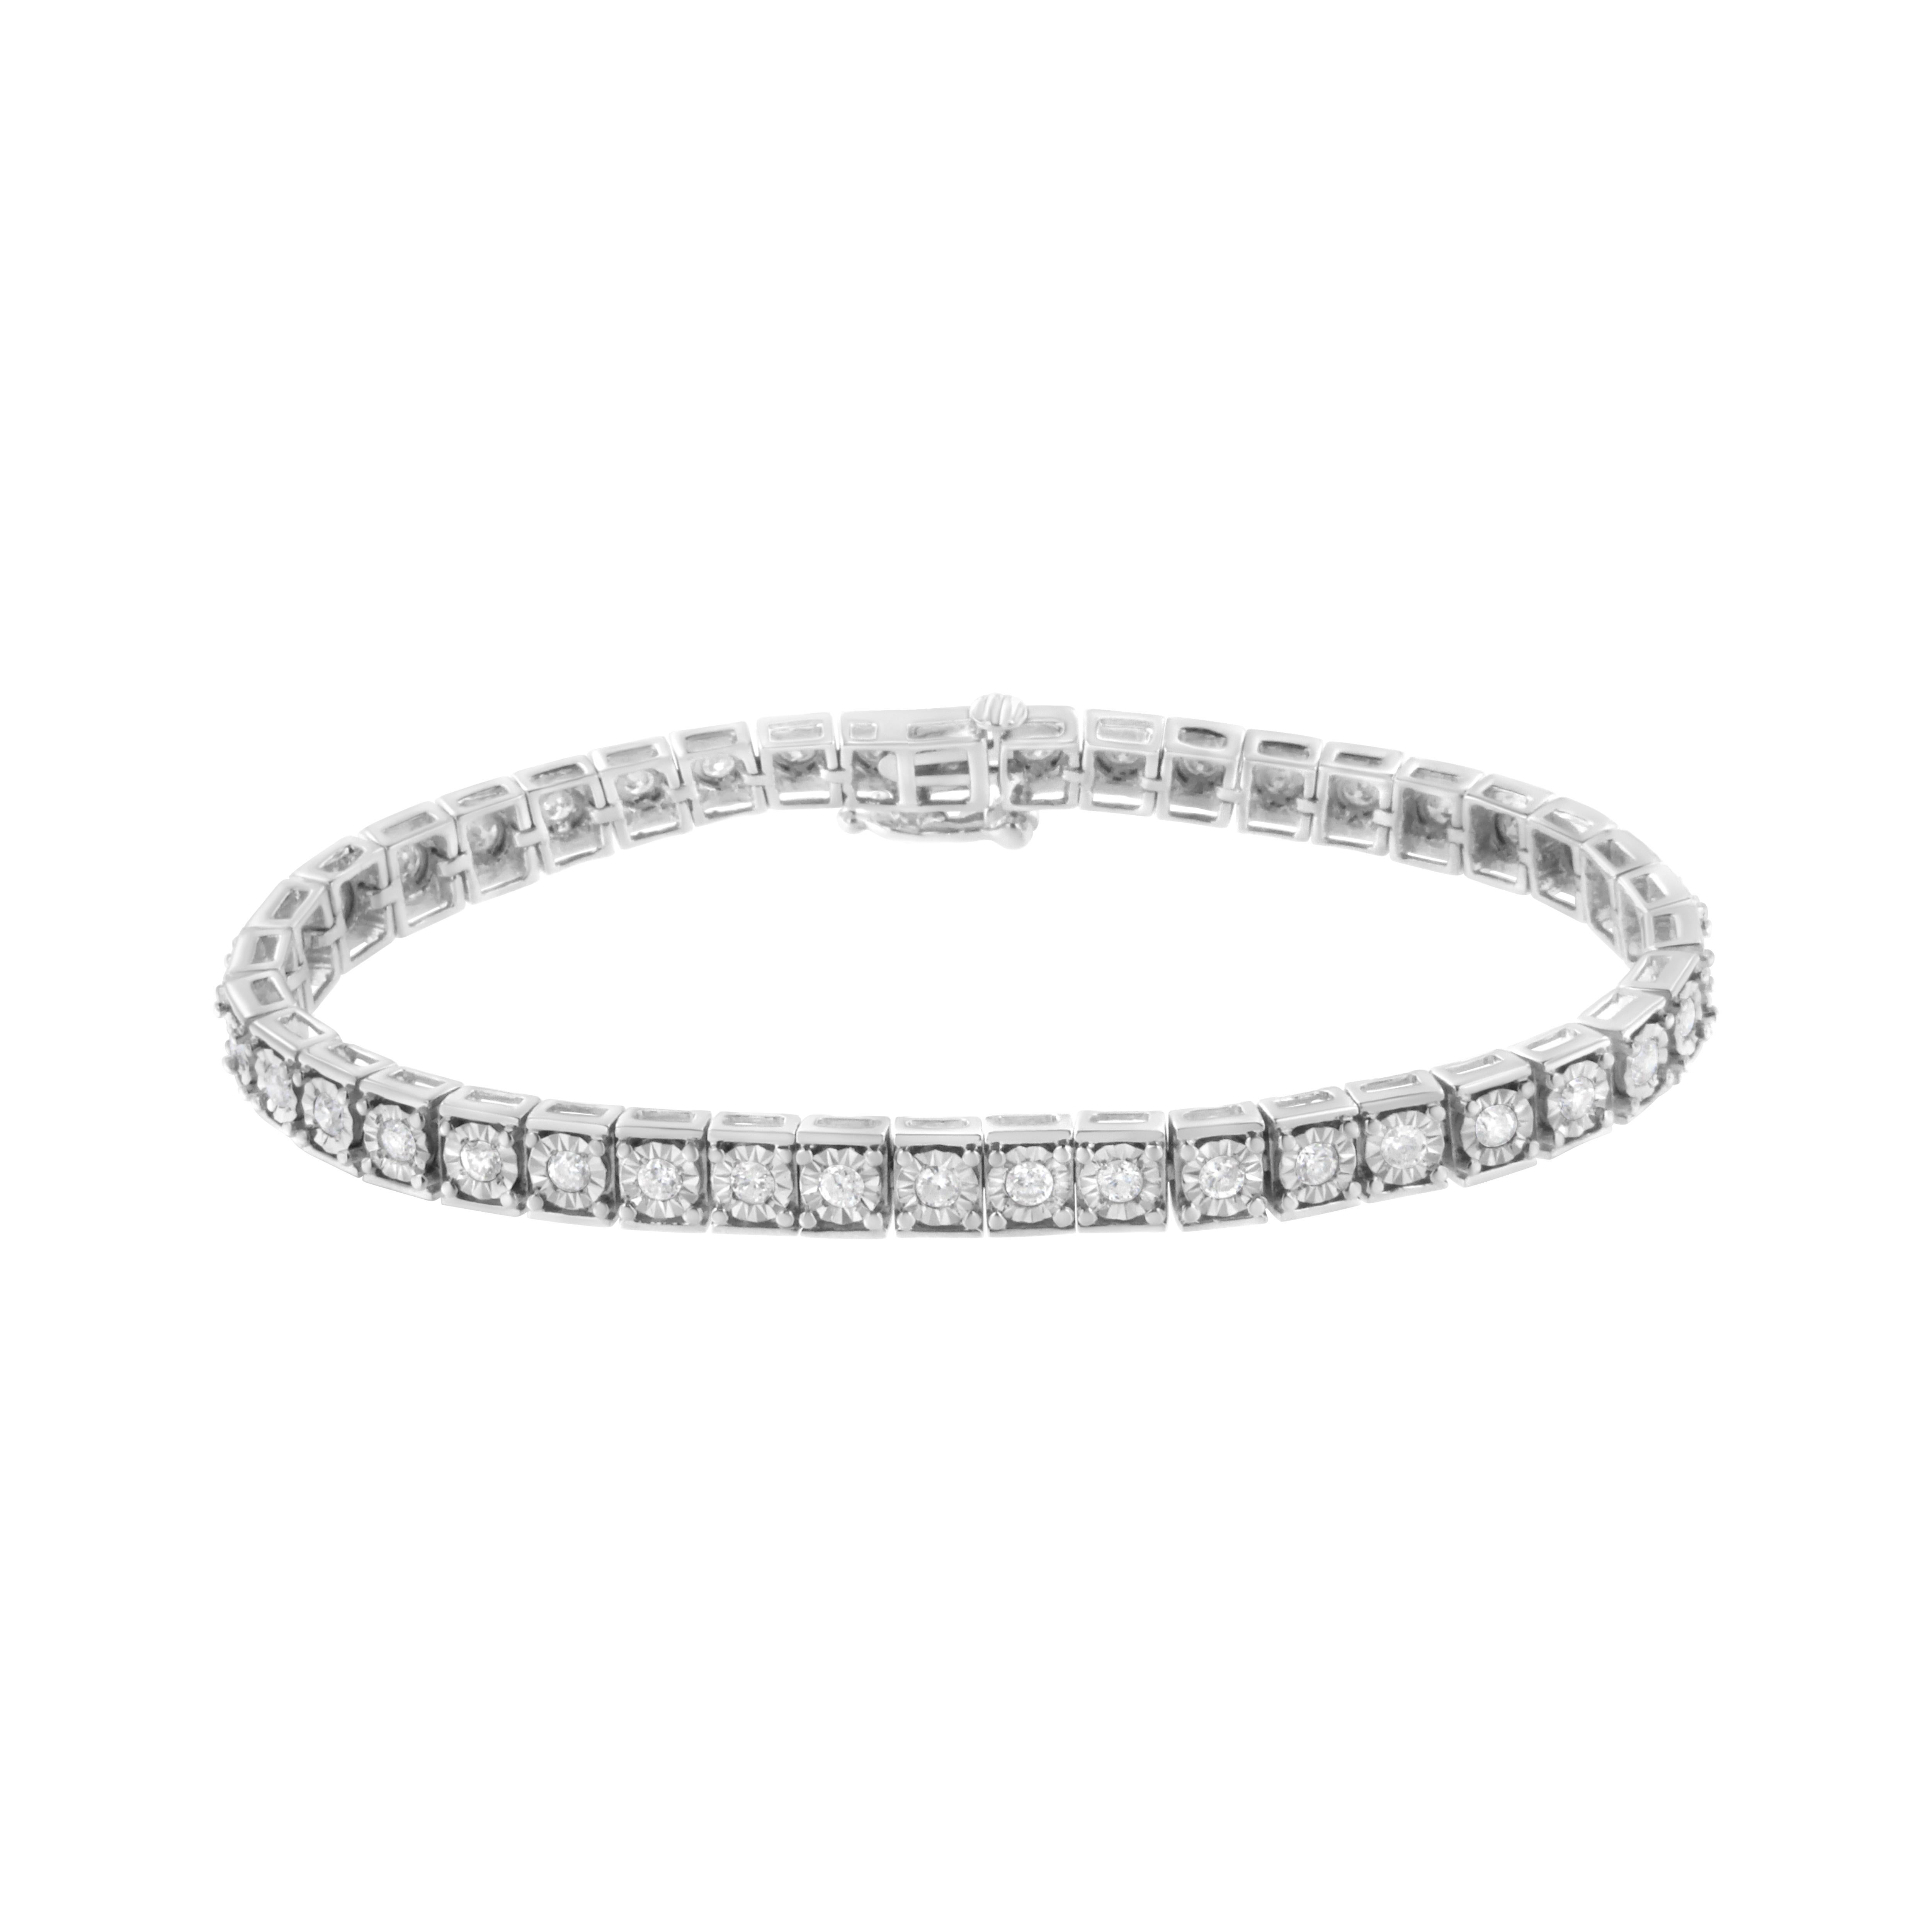 This elegant sterling silver tennis bracelet is created with 2 ct tdw of beautiful, natural diamonds. Rectangular links, each set with a round-cut diamond set in sterling silver, comprise the base of this design. This gorgeous piece will shine on